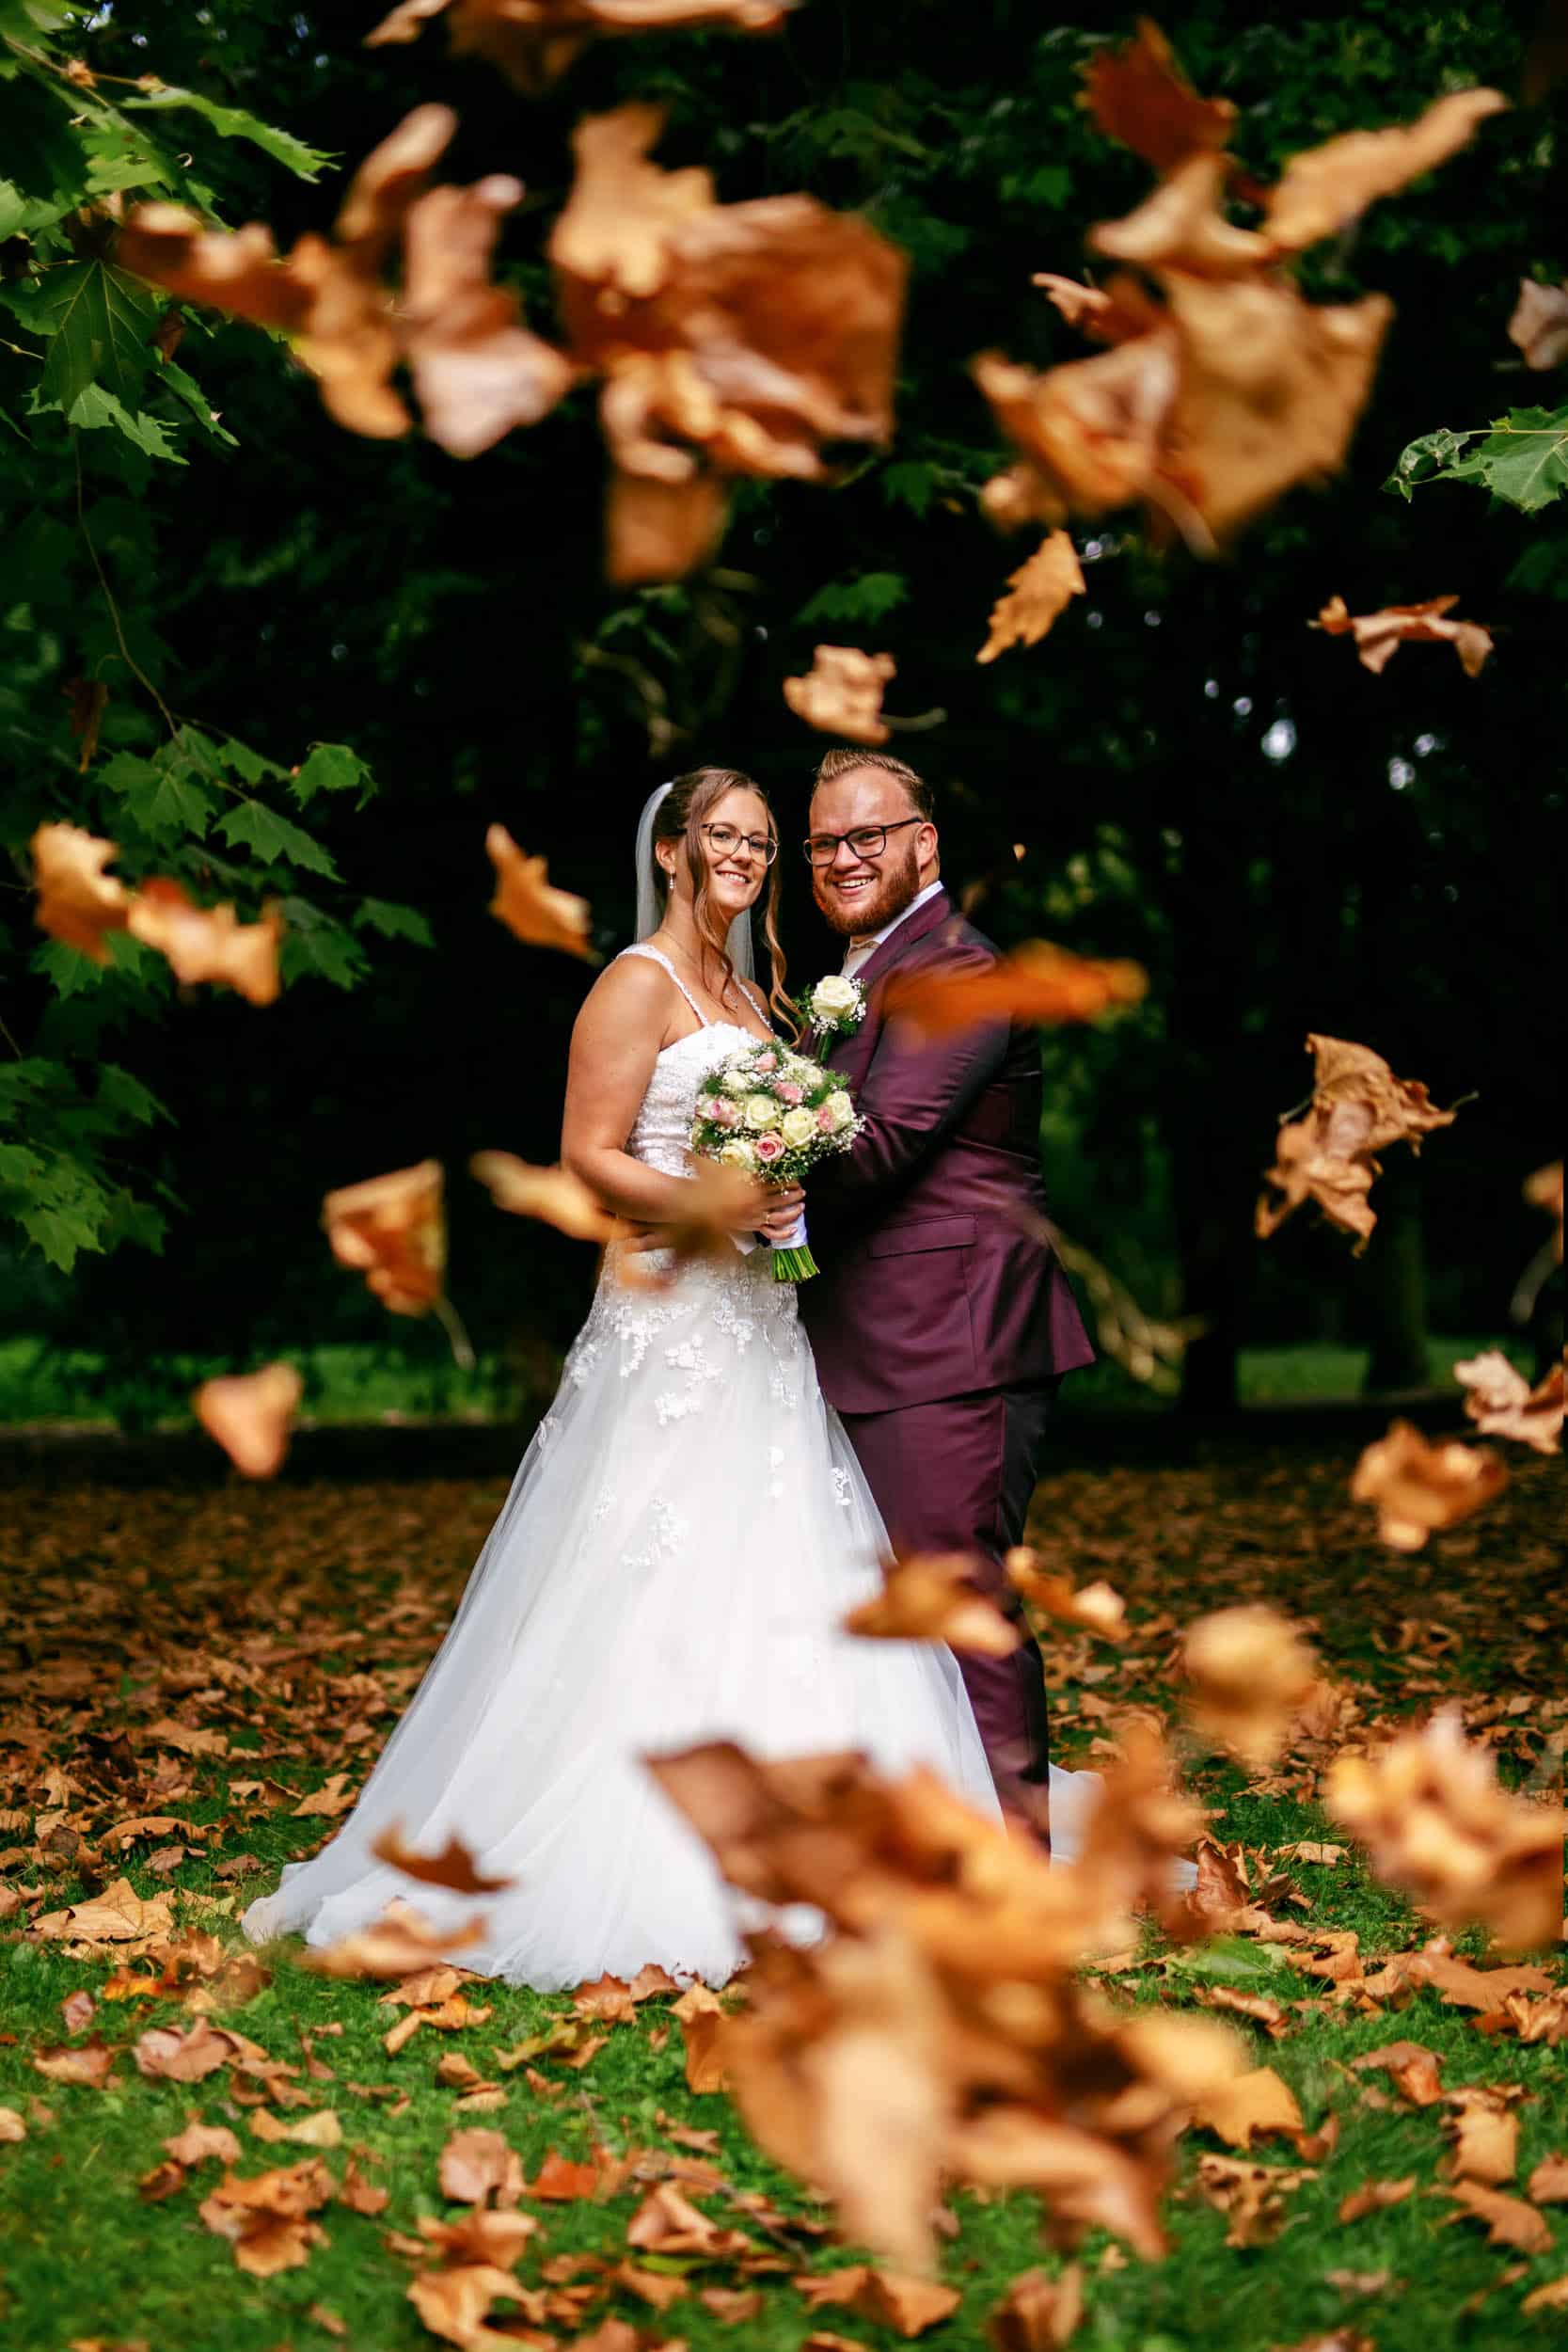 A bride and groom stand in a field with wedding-themed leaves falling around them.